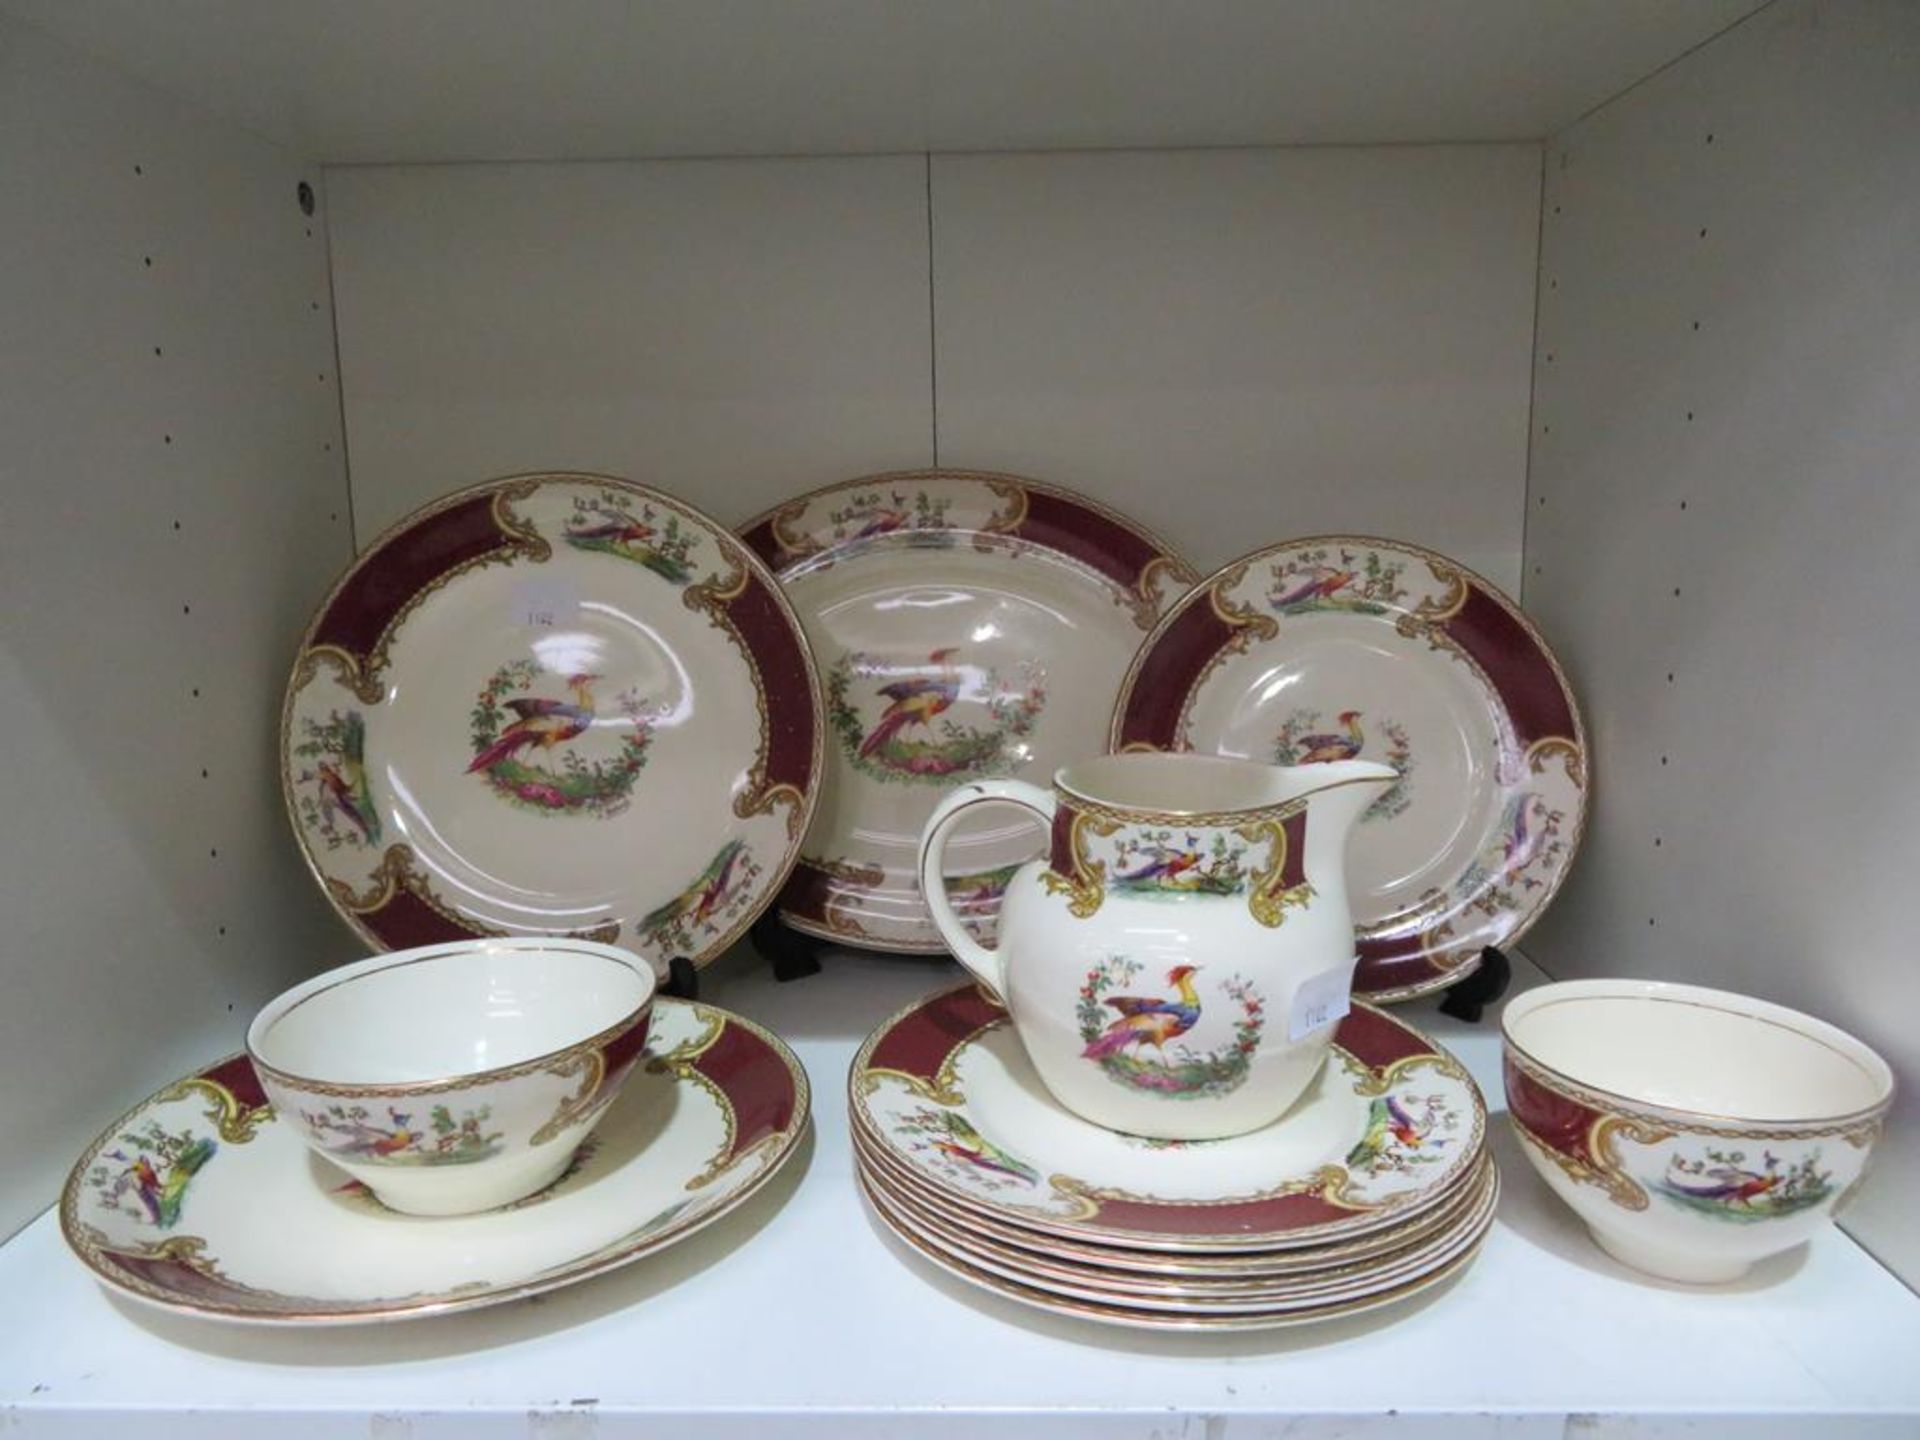 Over 30 pieces of Myott Staffordshire 'Red Chelsea - Image 2 of 3